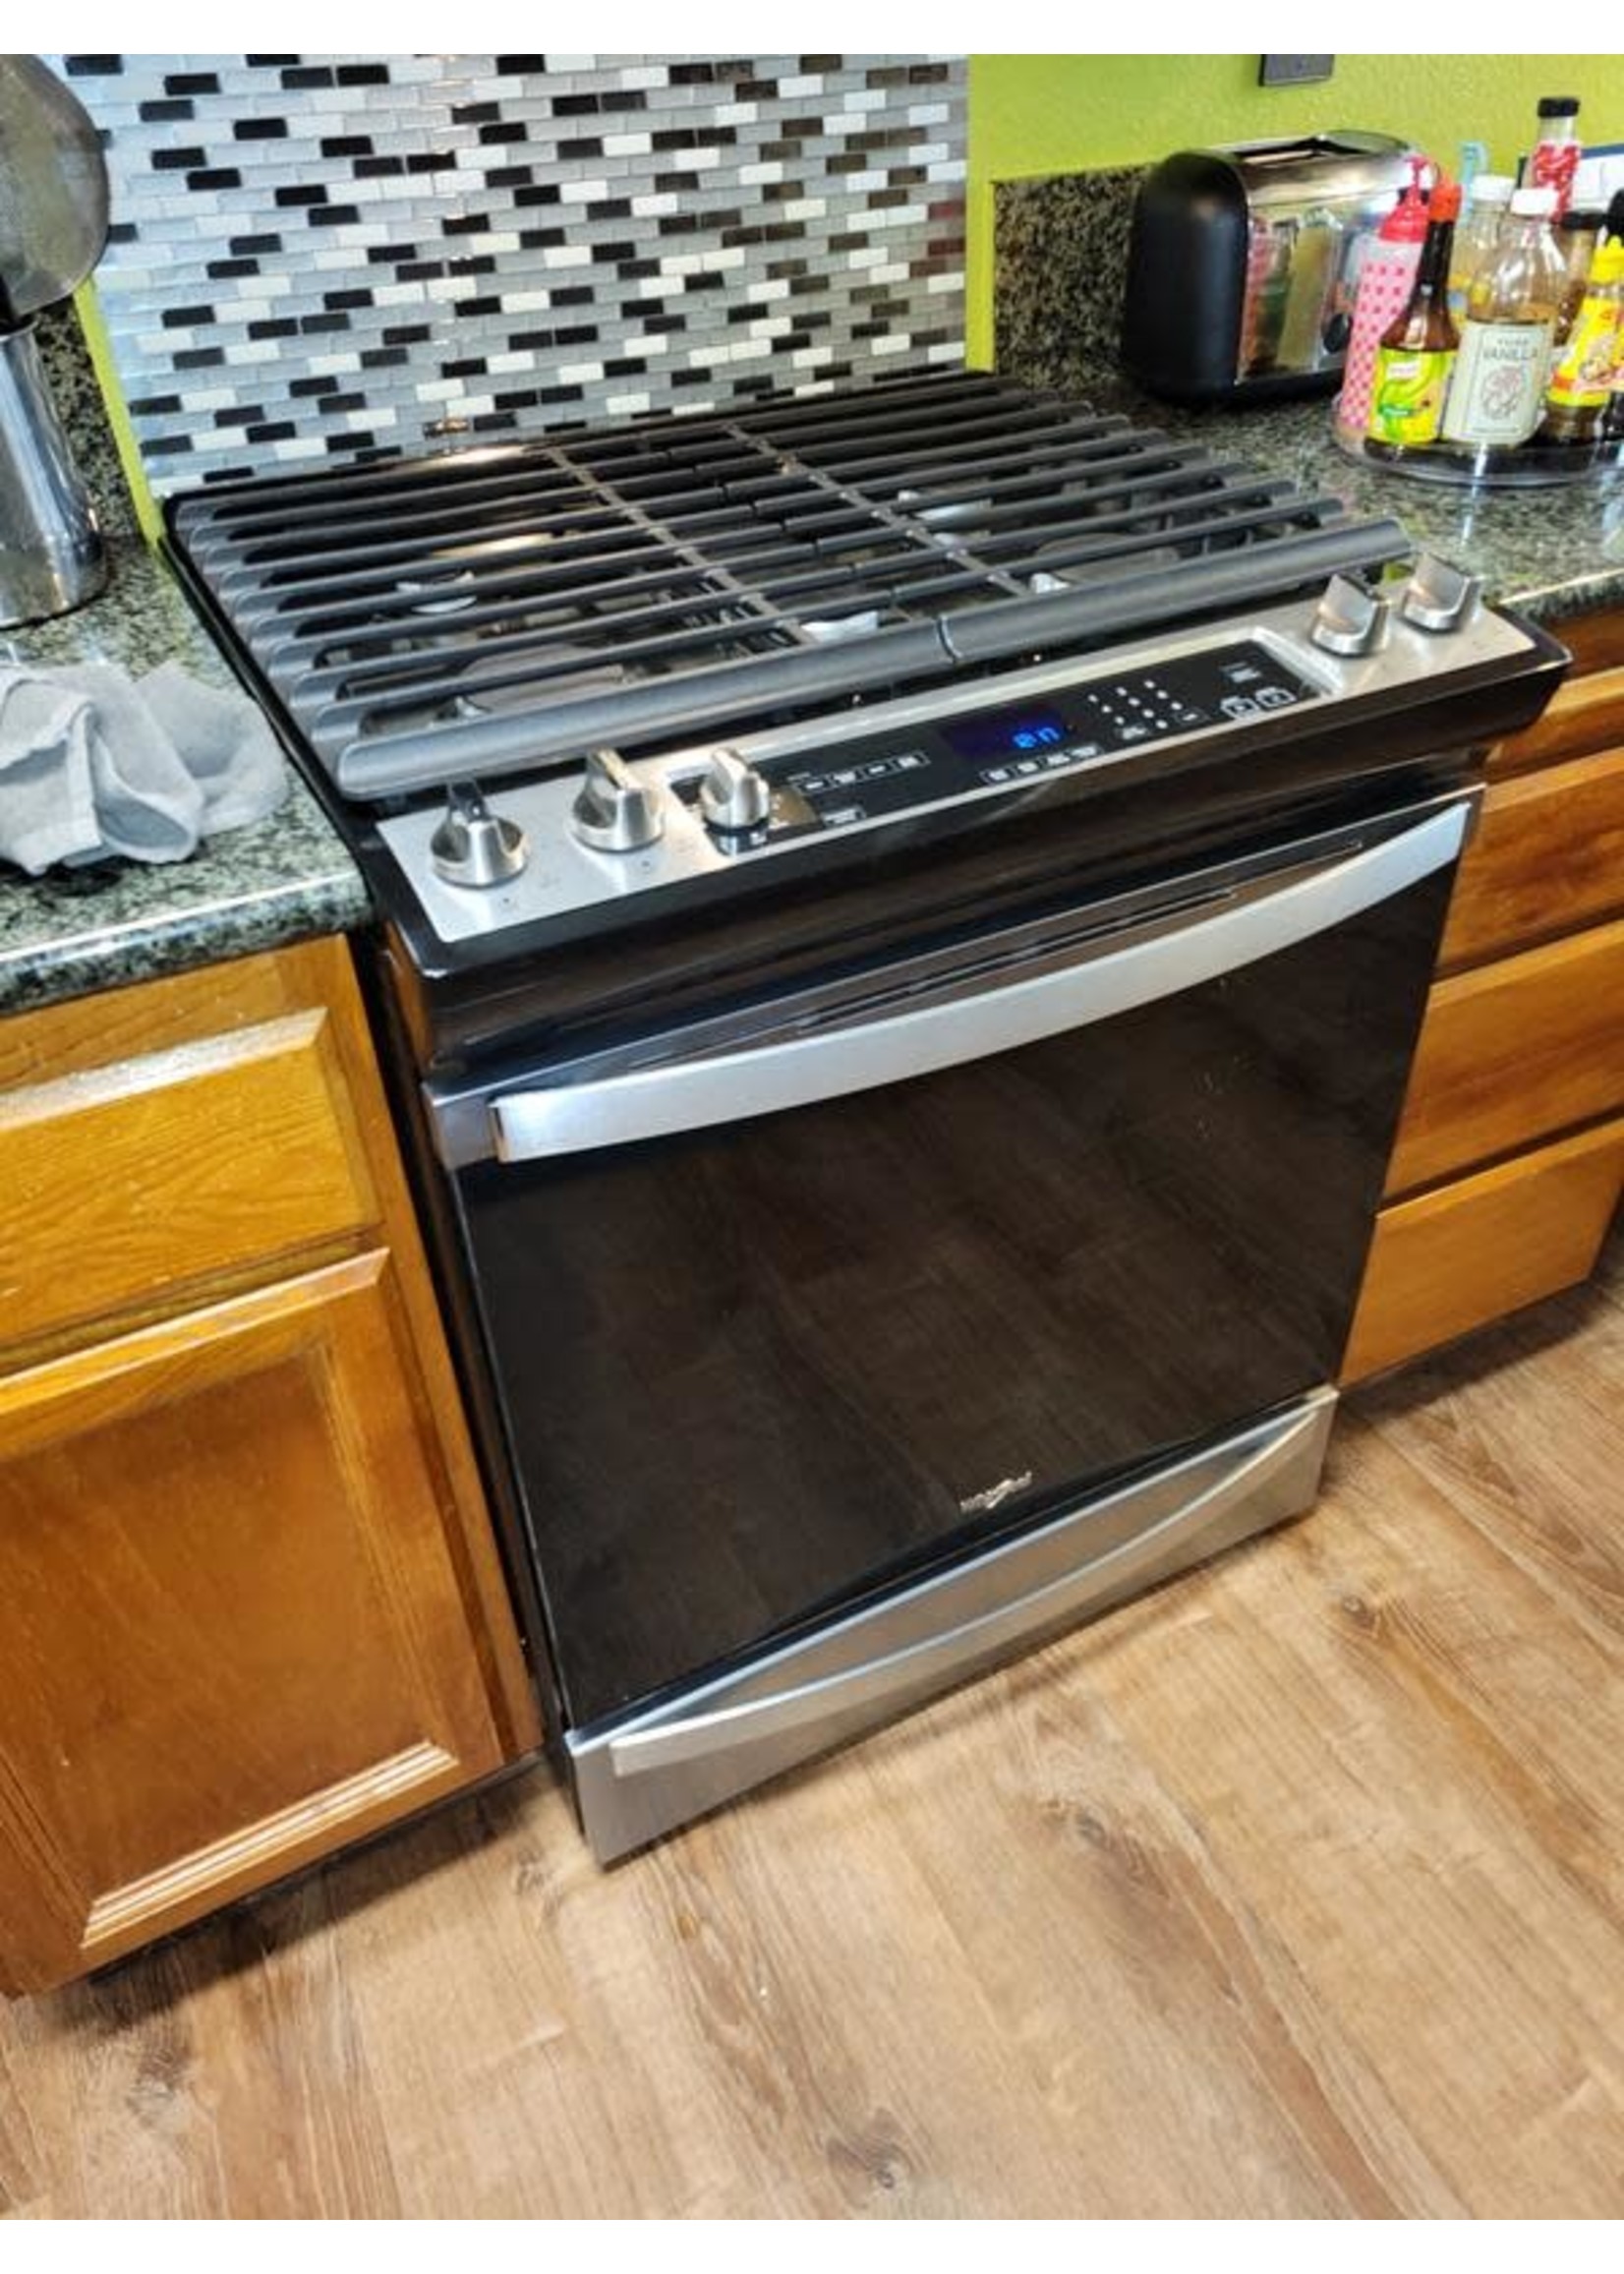 Whirlpool Whirlpool 5.8 cu. ft. Gas Range with Air Fry Oven in Fingerprint Resistant Stainless Steel